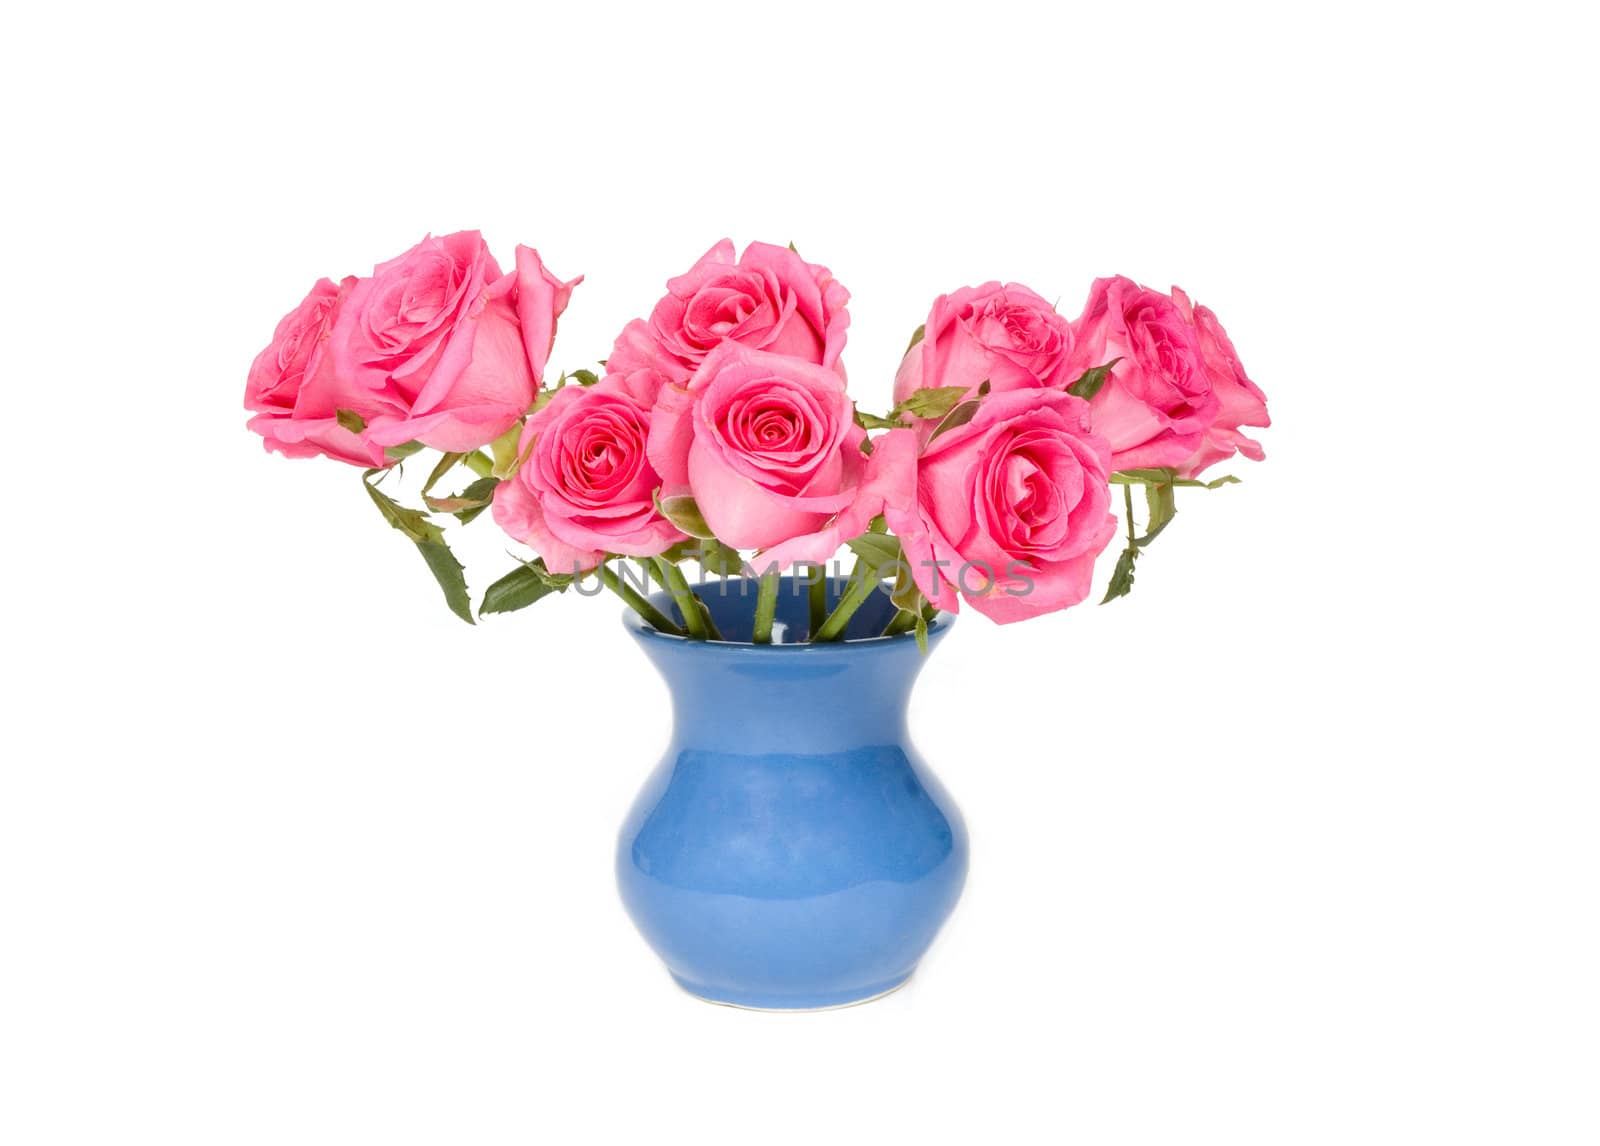  beautiful bouquet colorful pink roses in vase isolated over white 